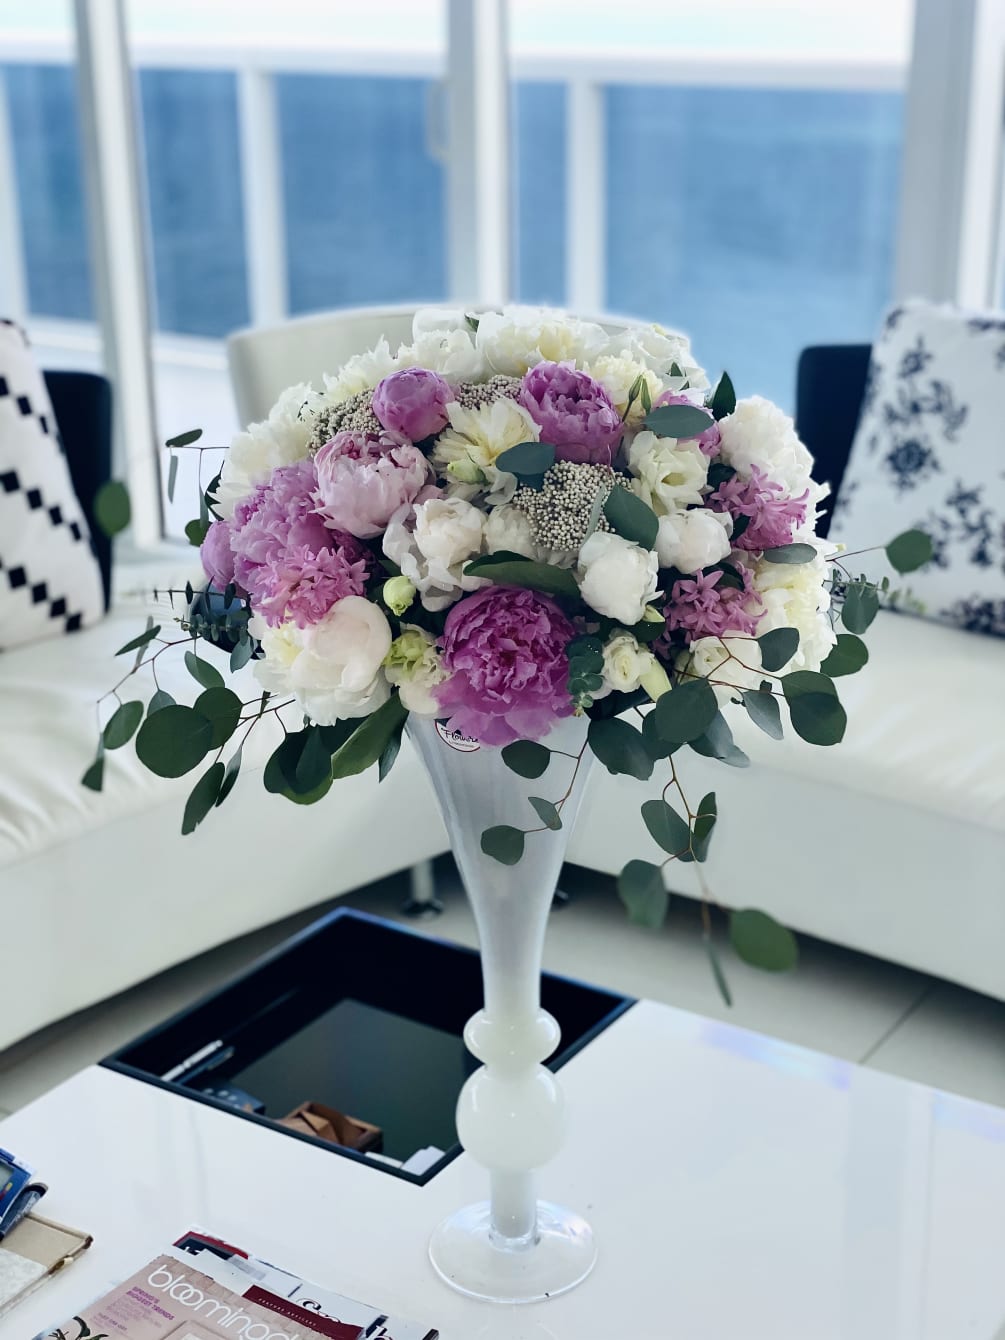 Peonies with lisianthus in a vase . Peony is a symbol of